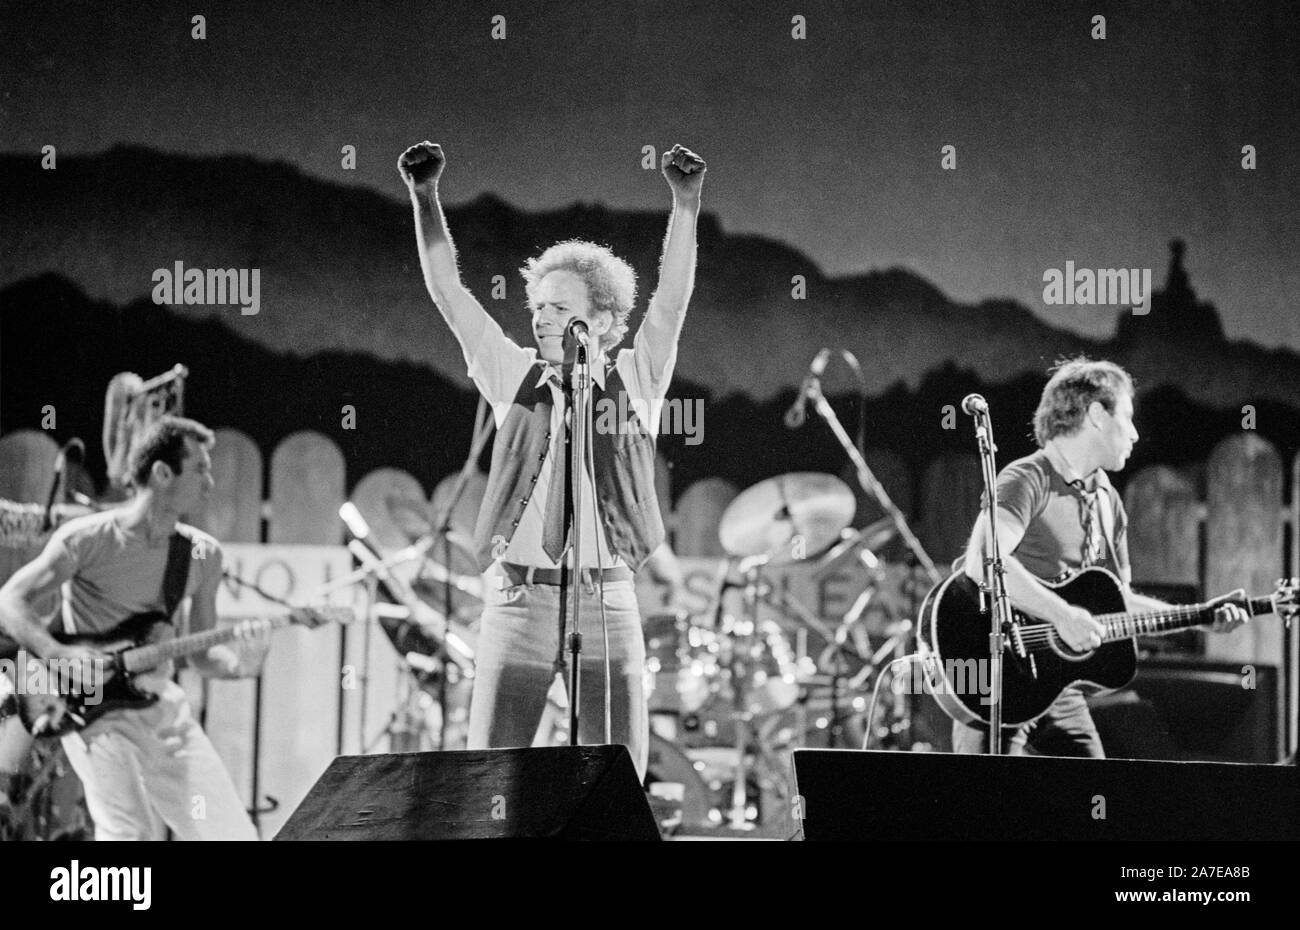 Paul Simon and Art Garfunkel in Concert at the Comishkey Park in Chicago, USA in 1983. Stock Photo